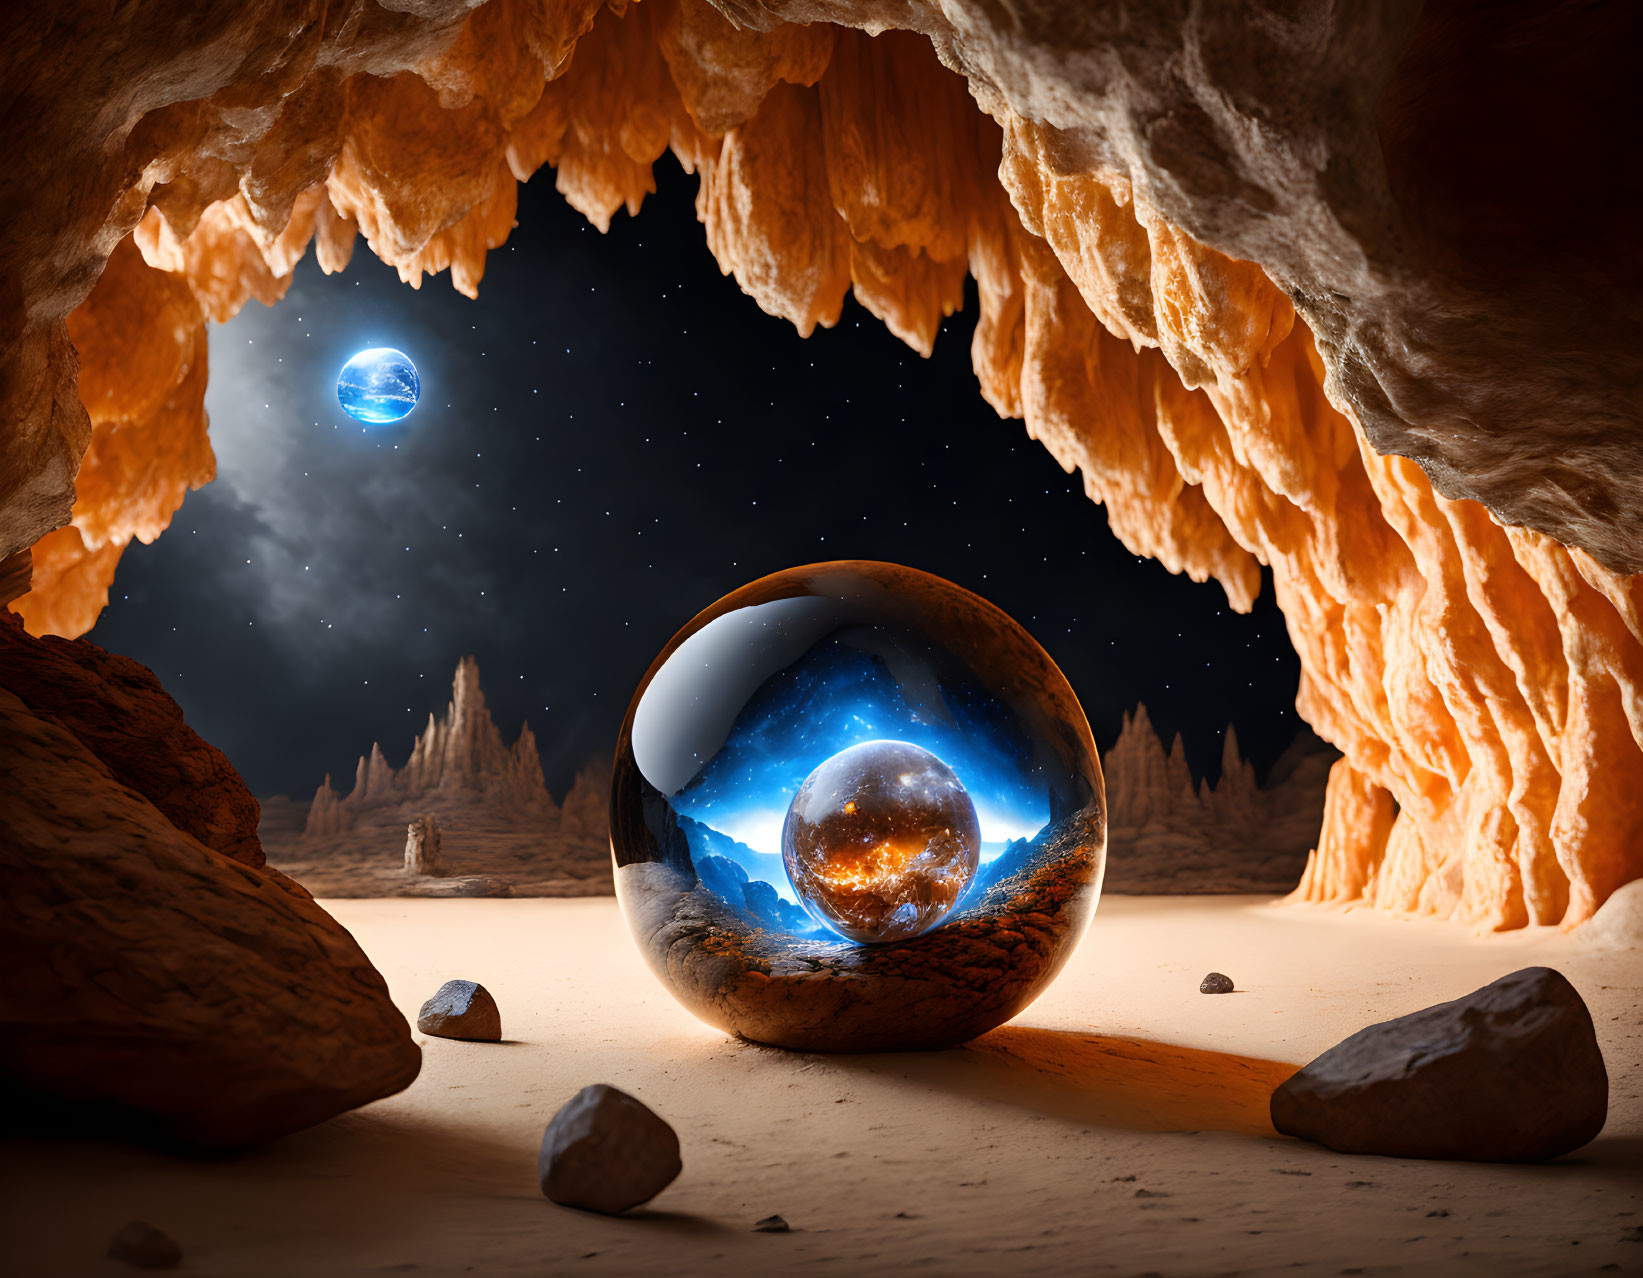 Surreal landscape with crystal ball, rocky terrain, starry sky, and two moons.